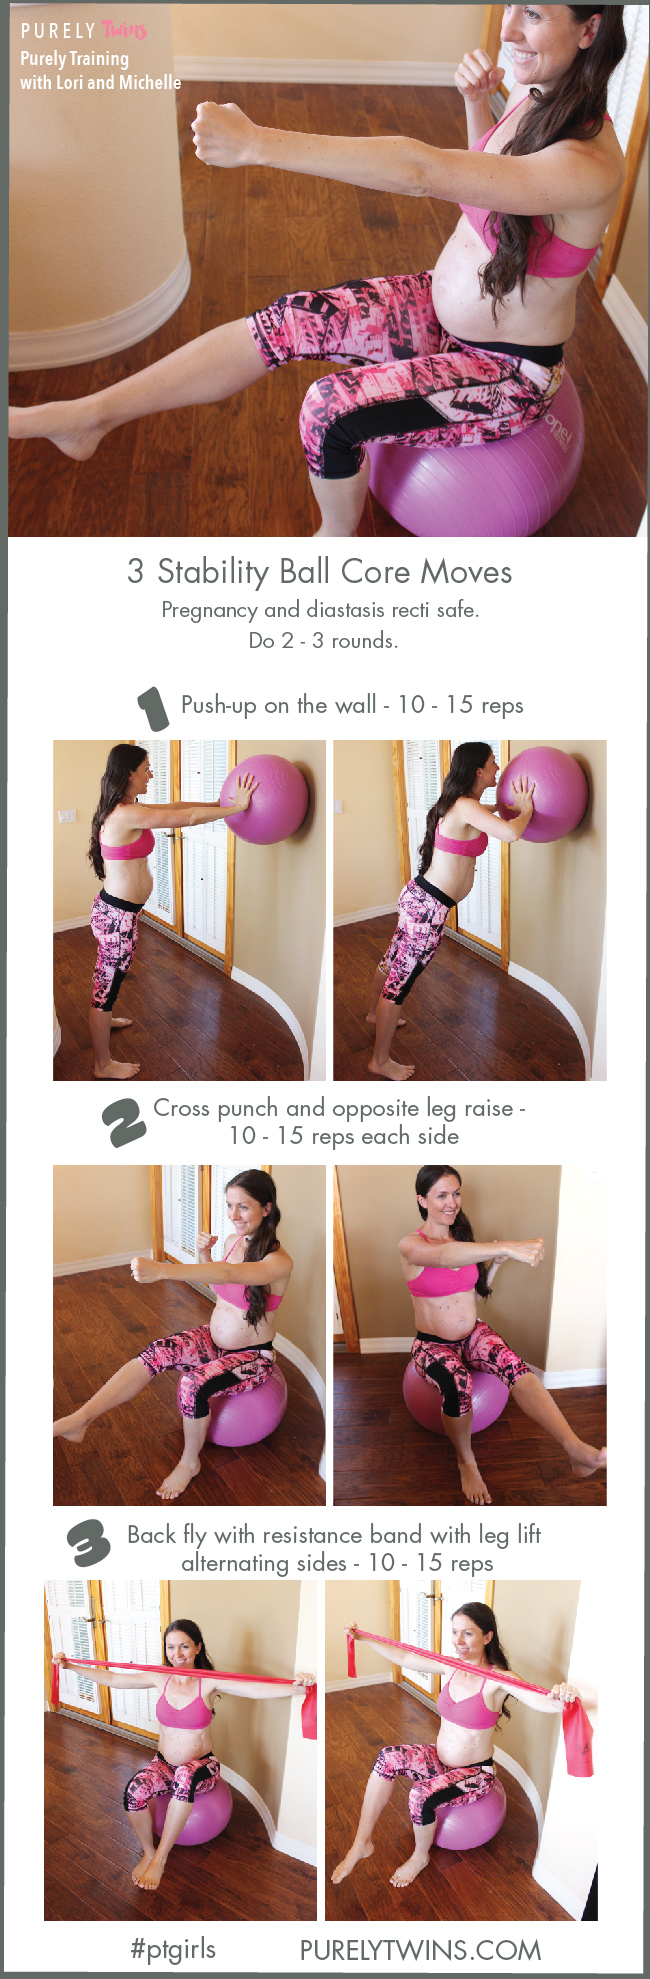 Confused on what are the best and safe CORE exercises to do during PREGNANCY? Especially to help prevent DIASTASIS. Here are 3 must-do core exercises that work the deep core muscles to keep the core and pelvic floor supported as your belly grows over each trimester. Note there are NO front loaded exercises which is key. 